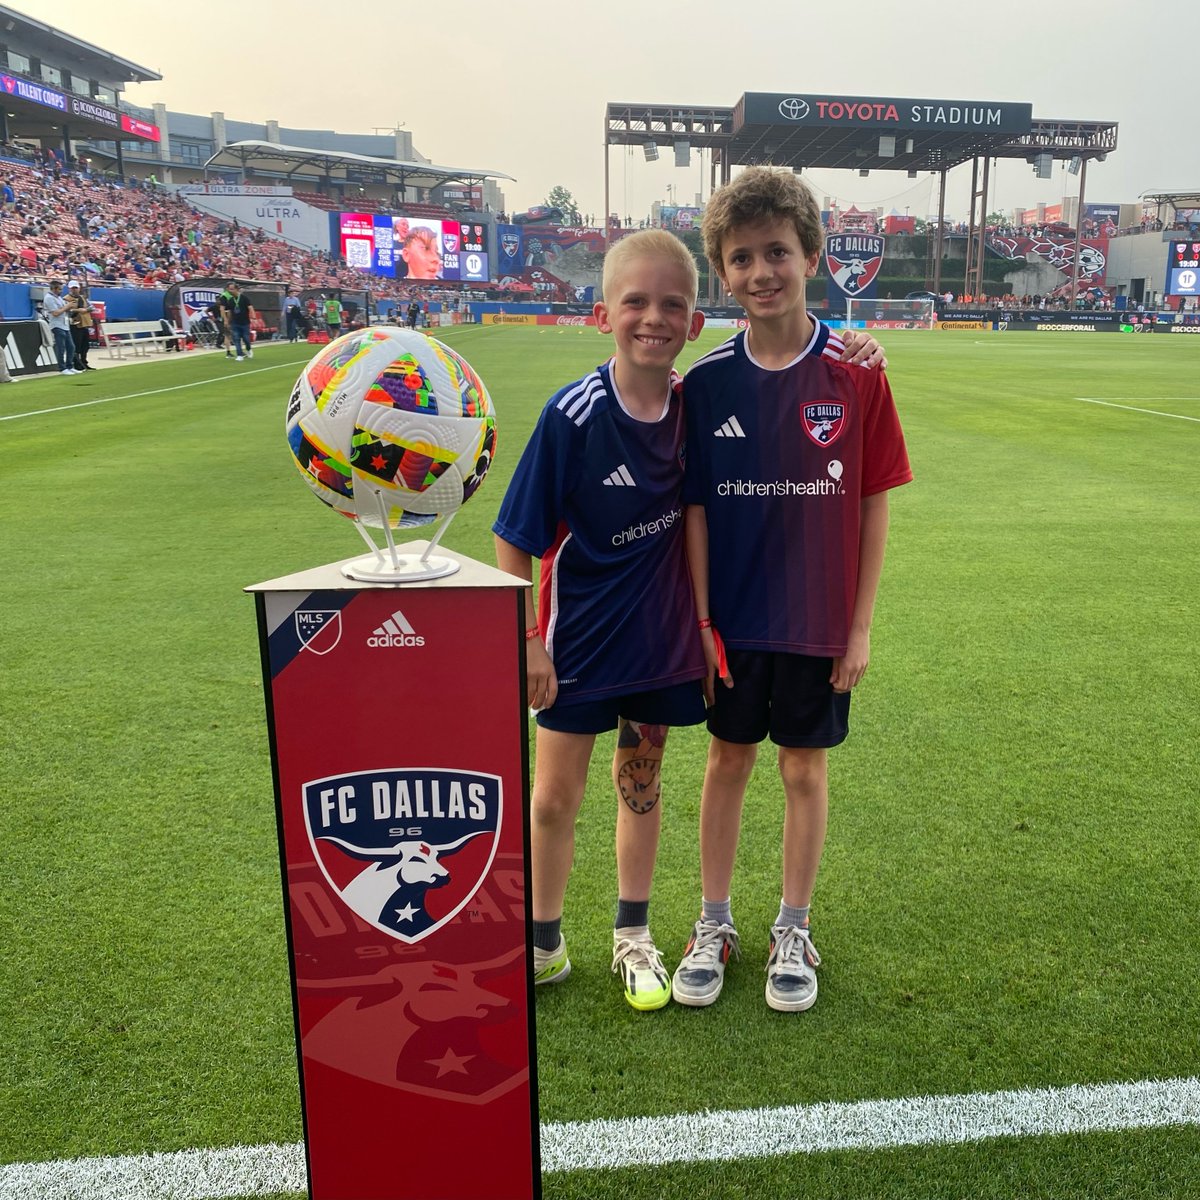 We welcome our Honorary Captain of the Match pres. by @childrens, Oliver! Oliver is an avid soccer player who hopes to one day play professionally for FC Dallas!